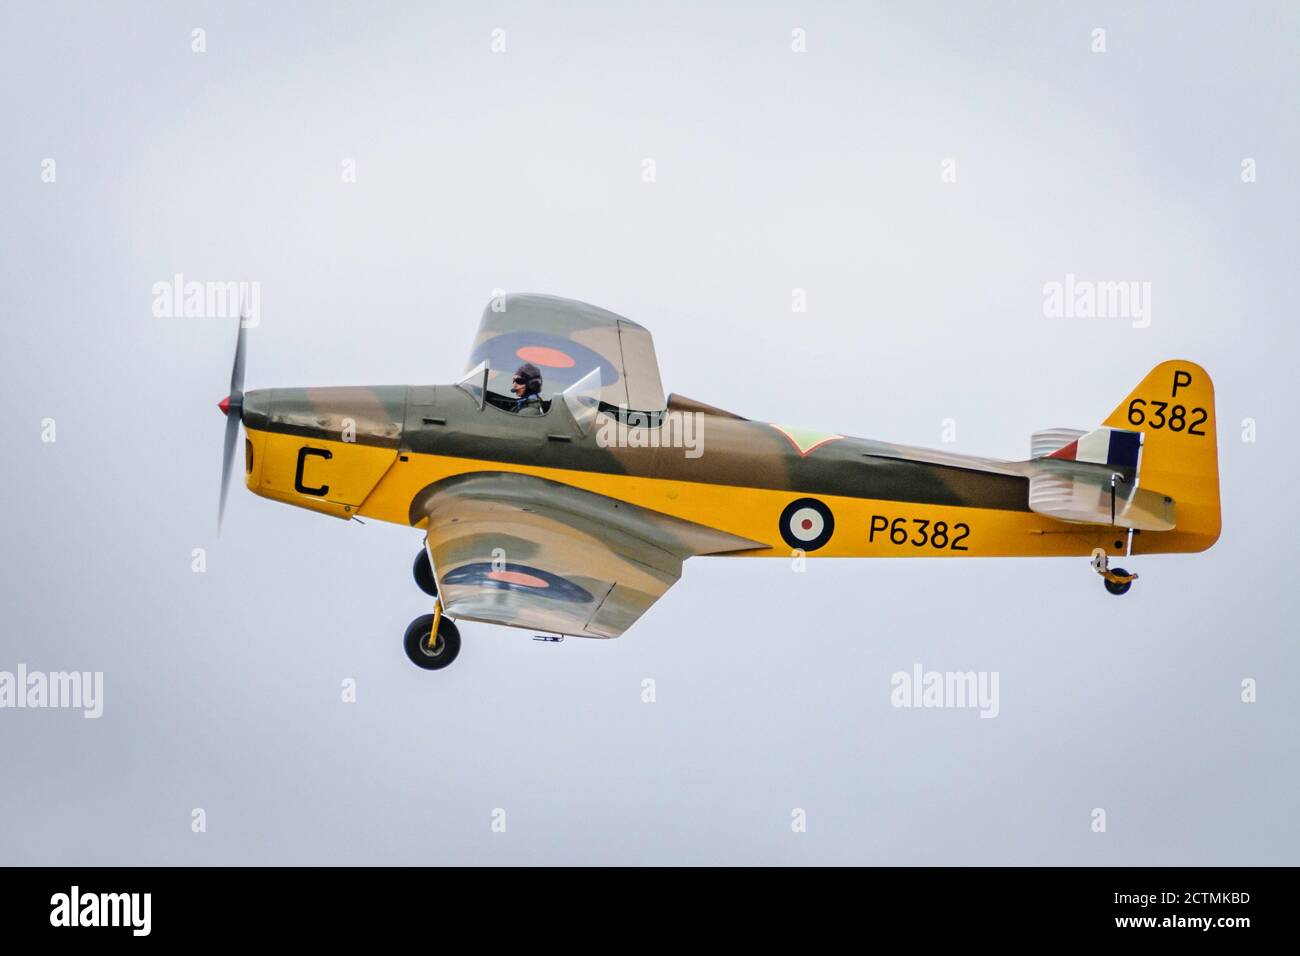 The British two-seat Miles Magister monoplane basic trainer aircraft was built in 1939 and entered service with the RAF as P6382. Stock Photo